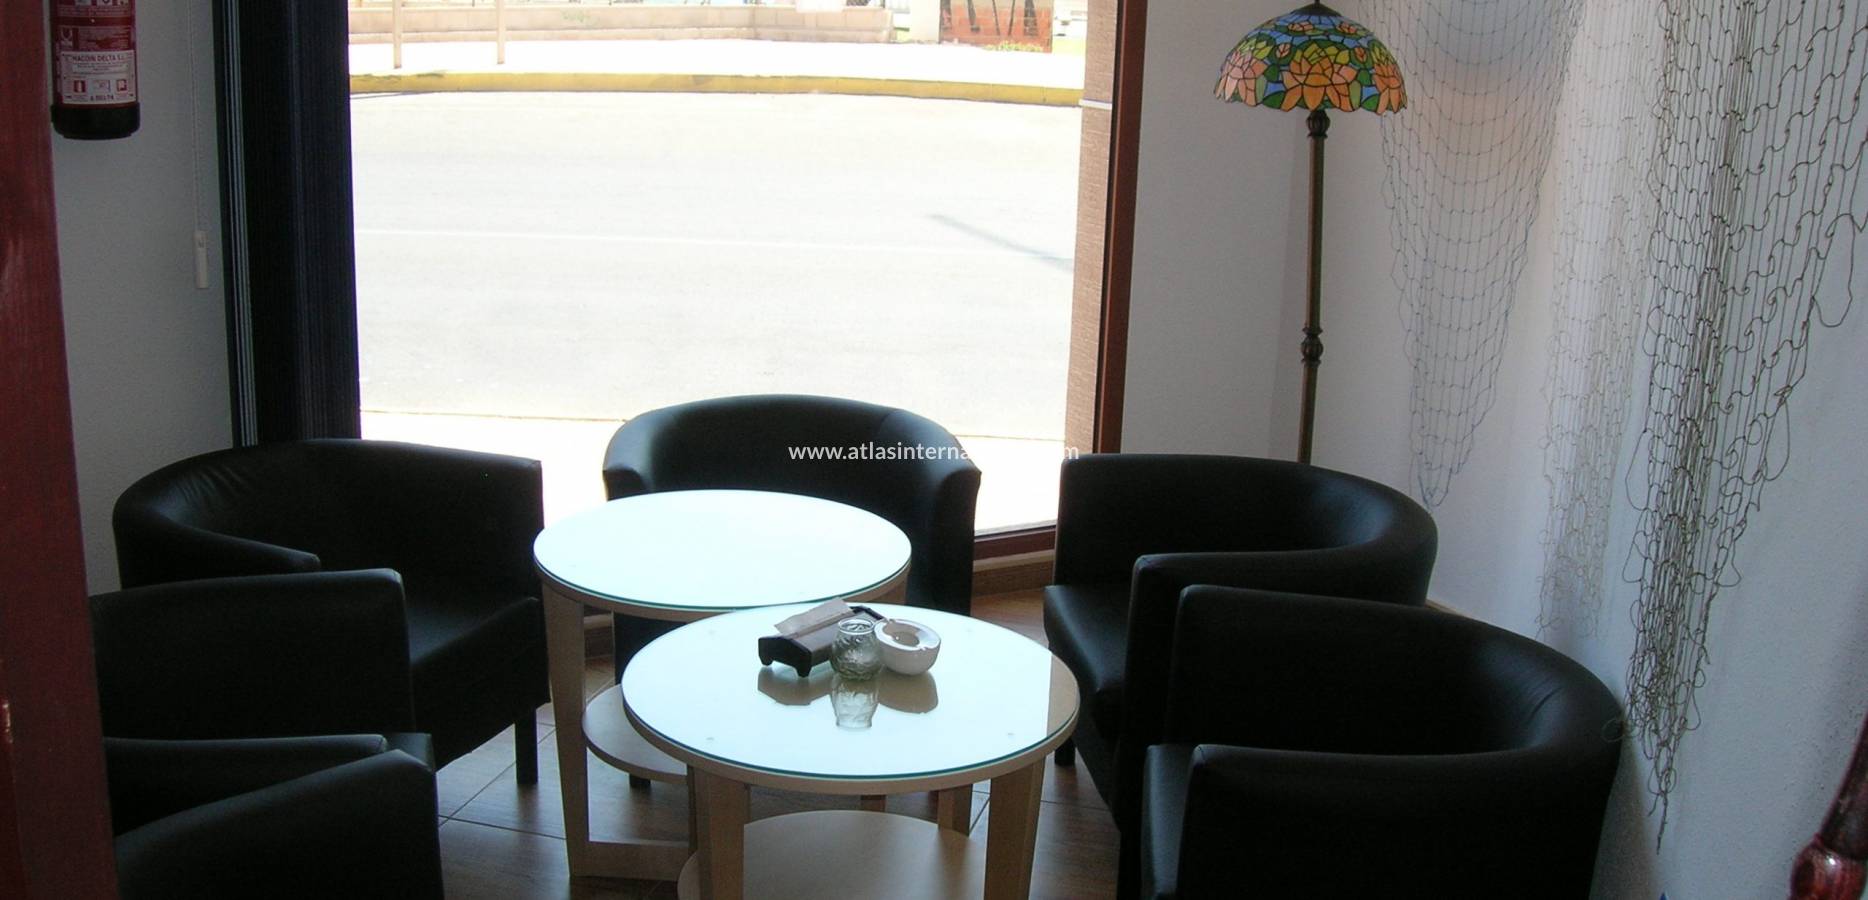 Resale - Local comercial - Torrevieja